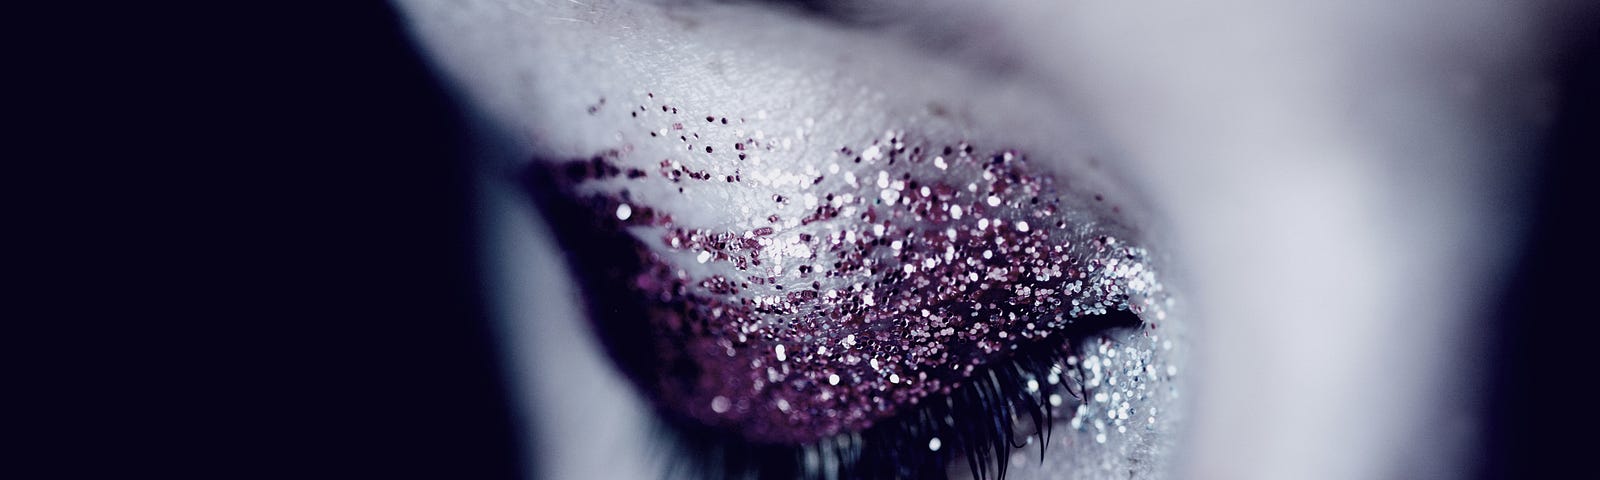 Close-up of a woman’s closed eye with glittery make-up.